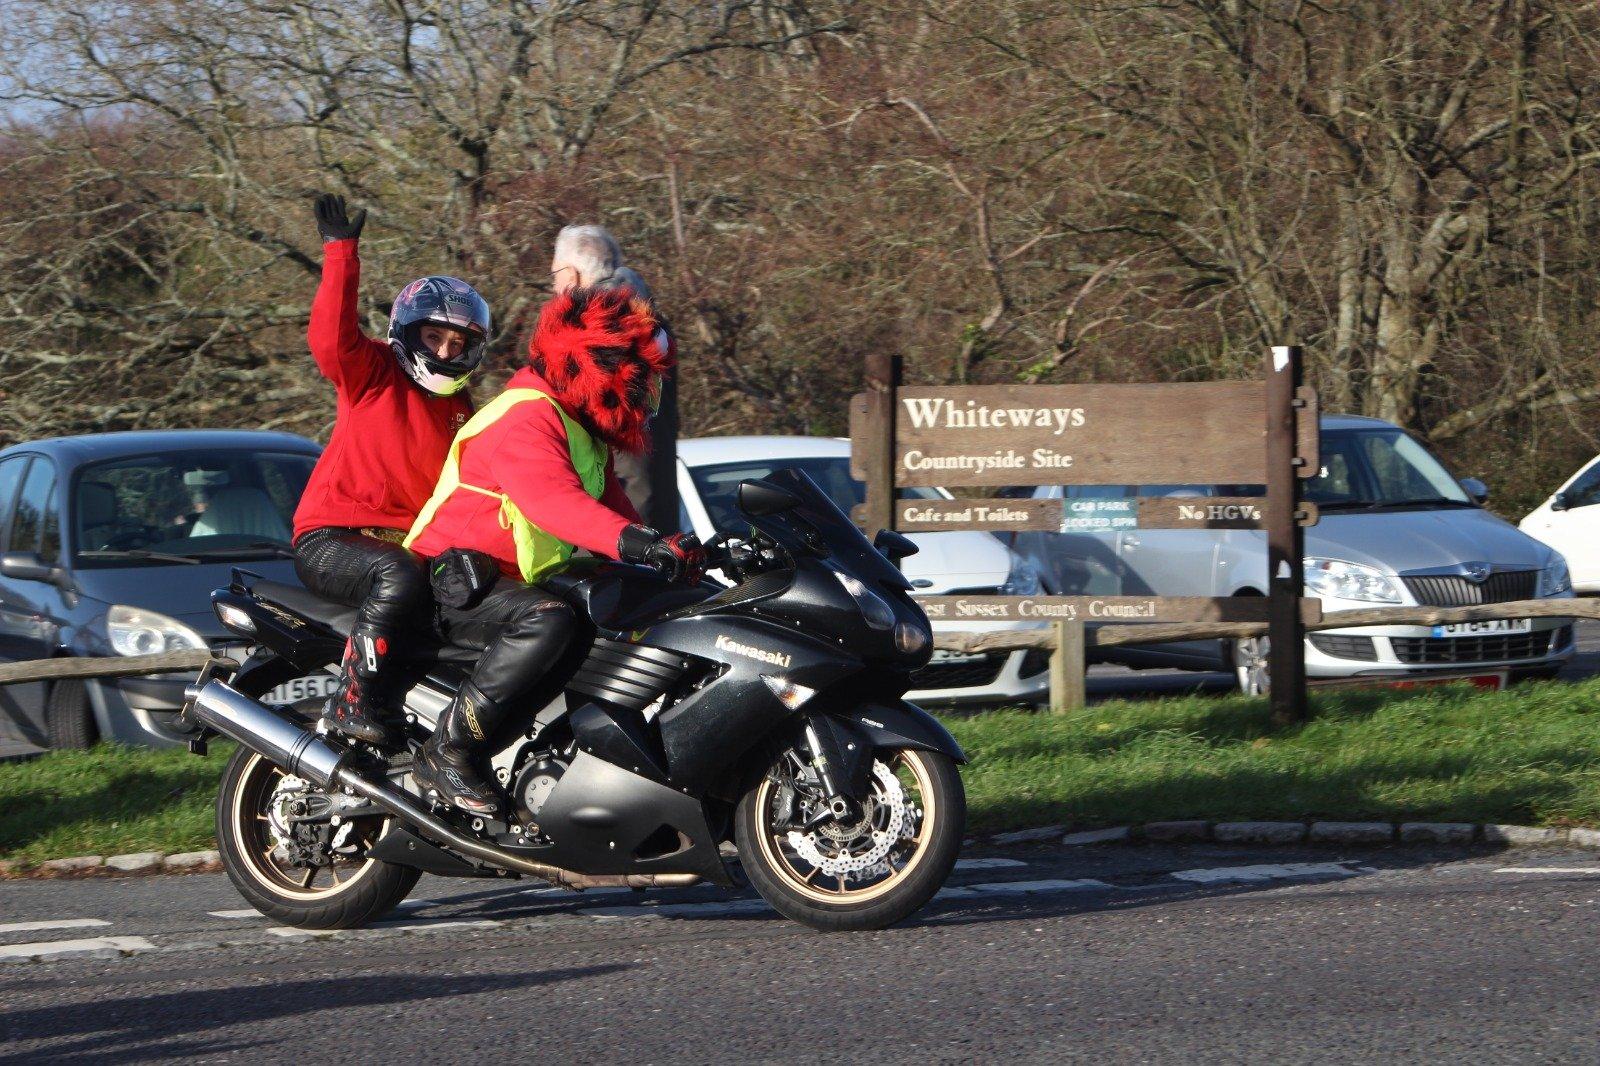 South Coast Bikers ride out to deliver presents to Chestnut Tree House children's hospice